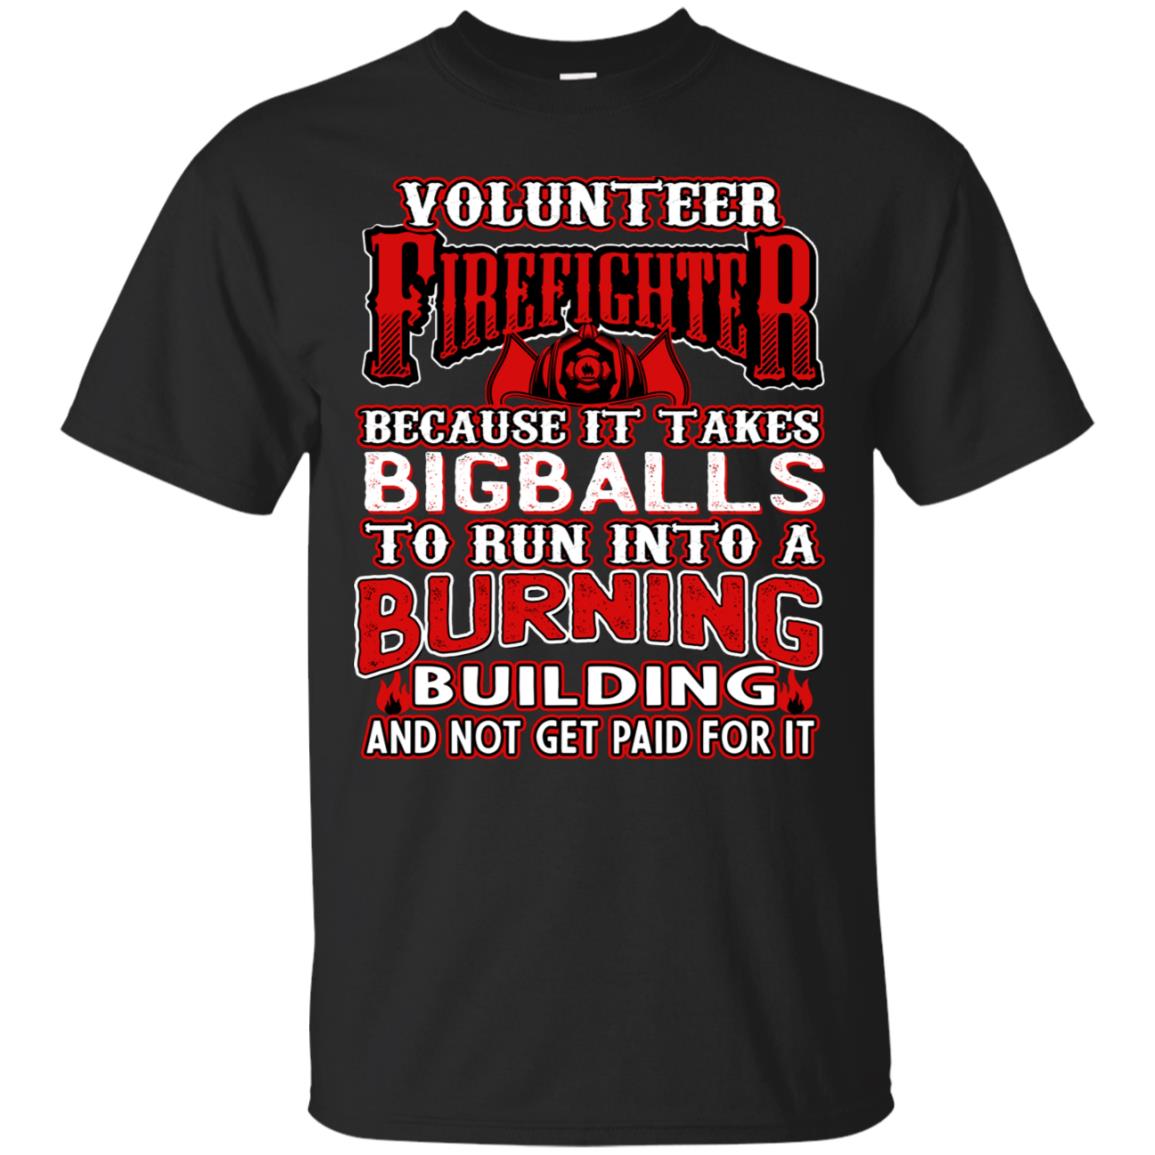 Voluteer Firefighter Because It Takes Bigballs To Run Into A Burning  Building And Not Get Paid For ItG200 Gildan Ultra Cotton T-Shirt